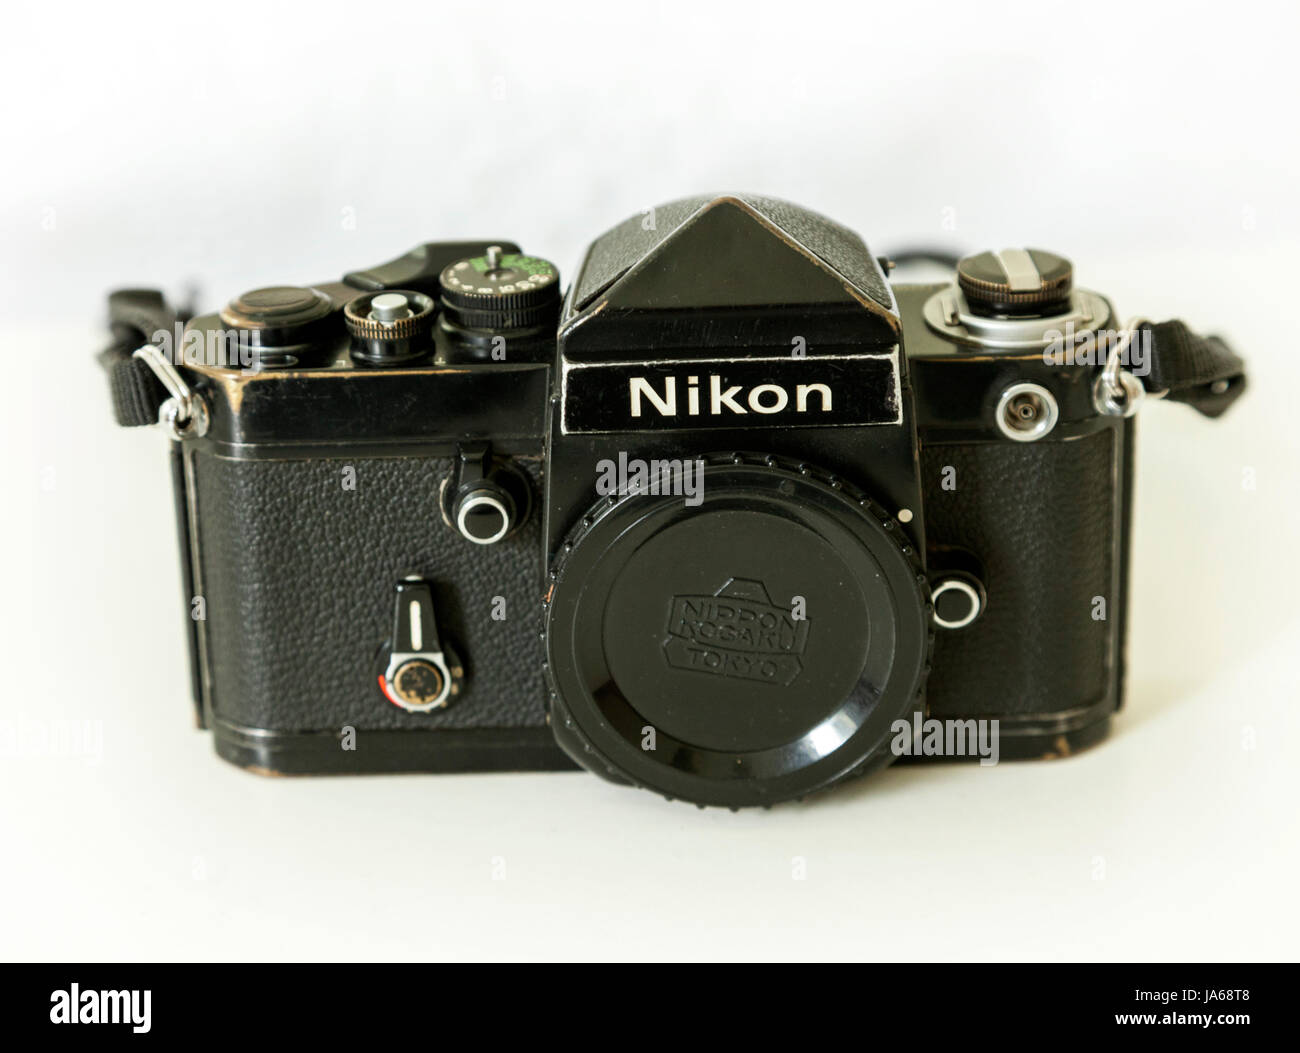 Nikon F2 camera body, battered and well used. Stock Photo